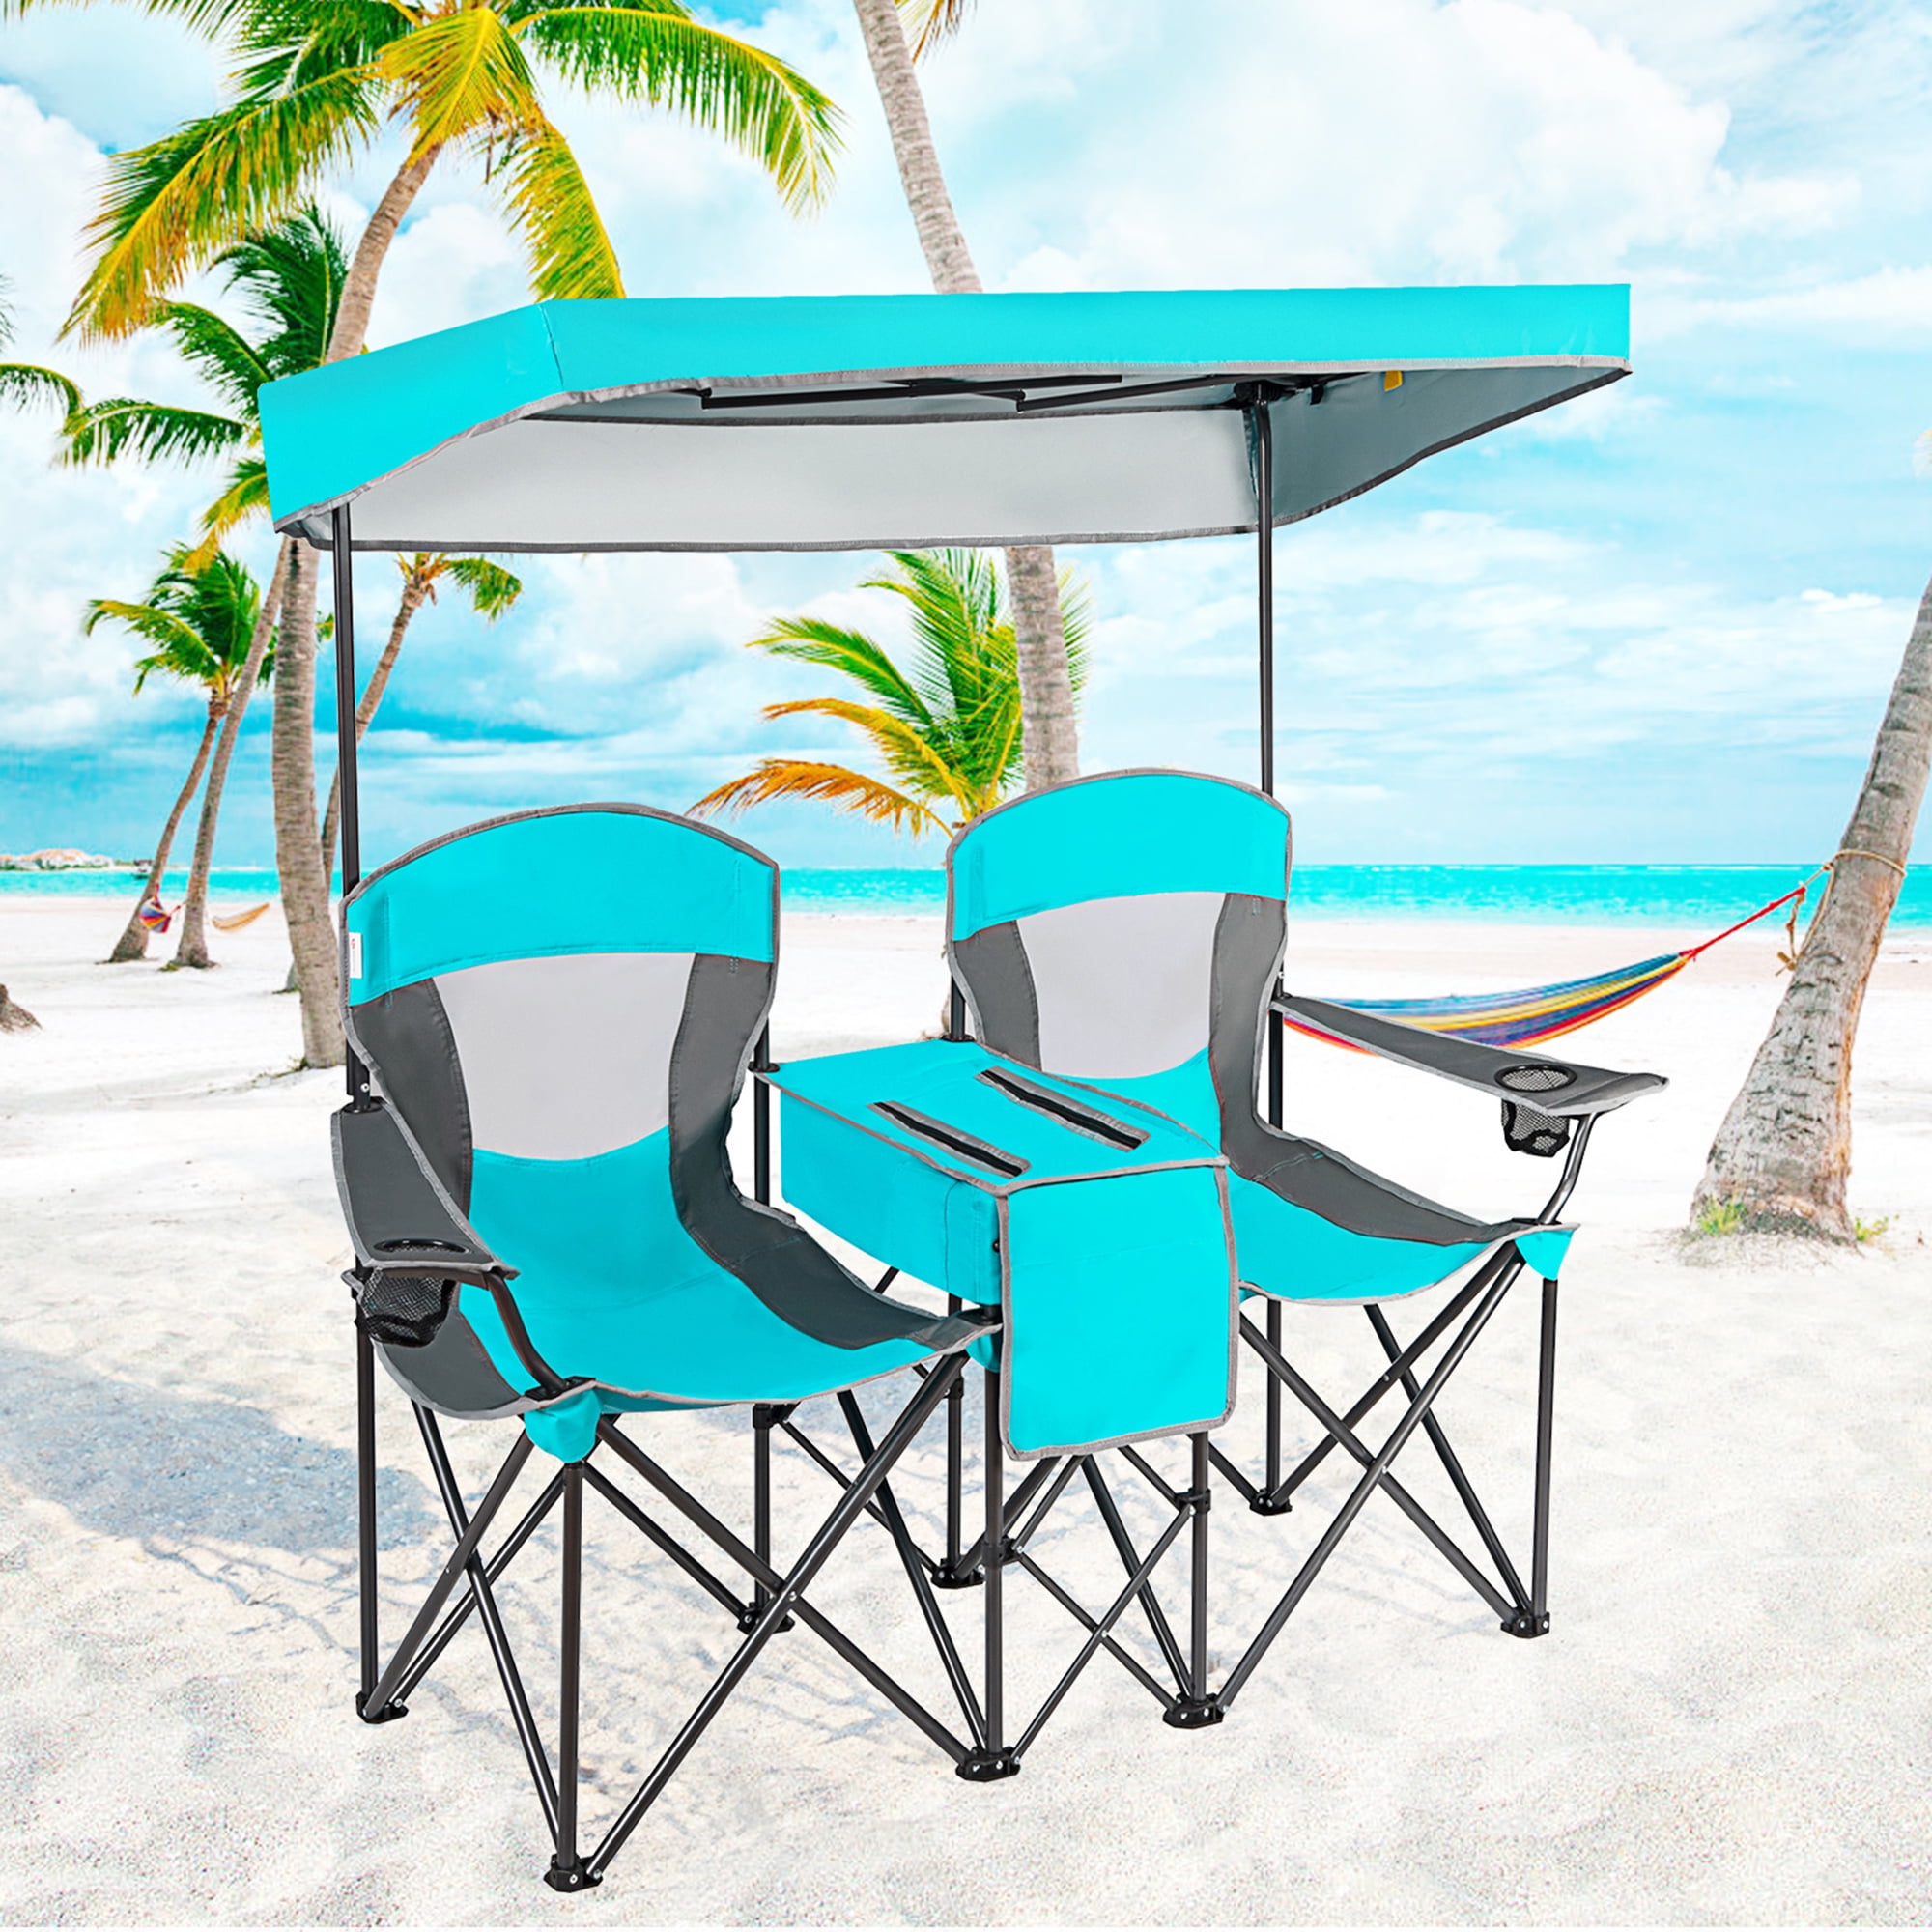 Camping Chairs with Canopy - Best Furniture Gallery Check more at